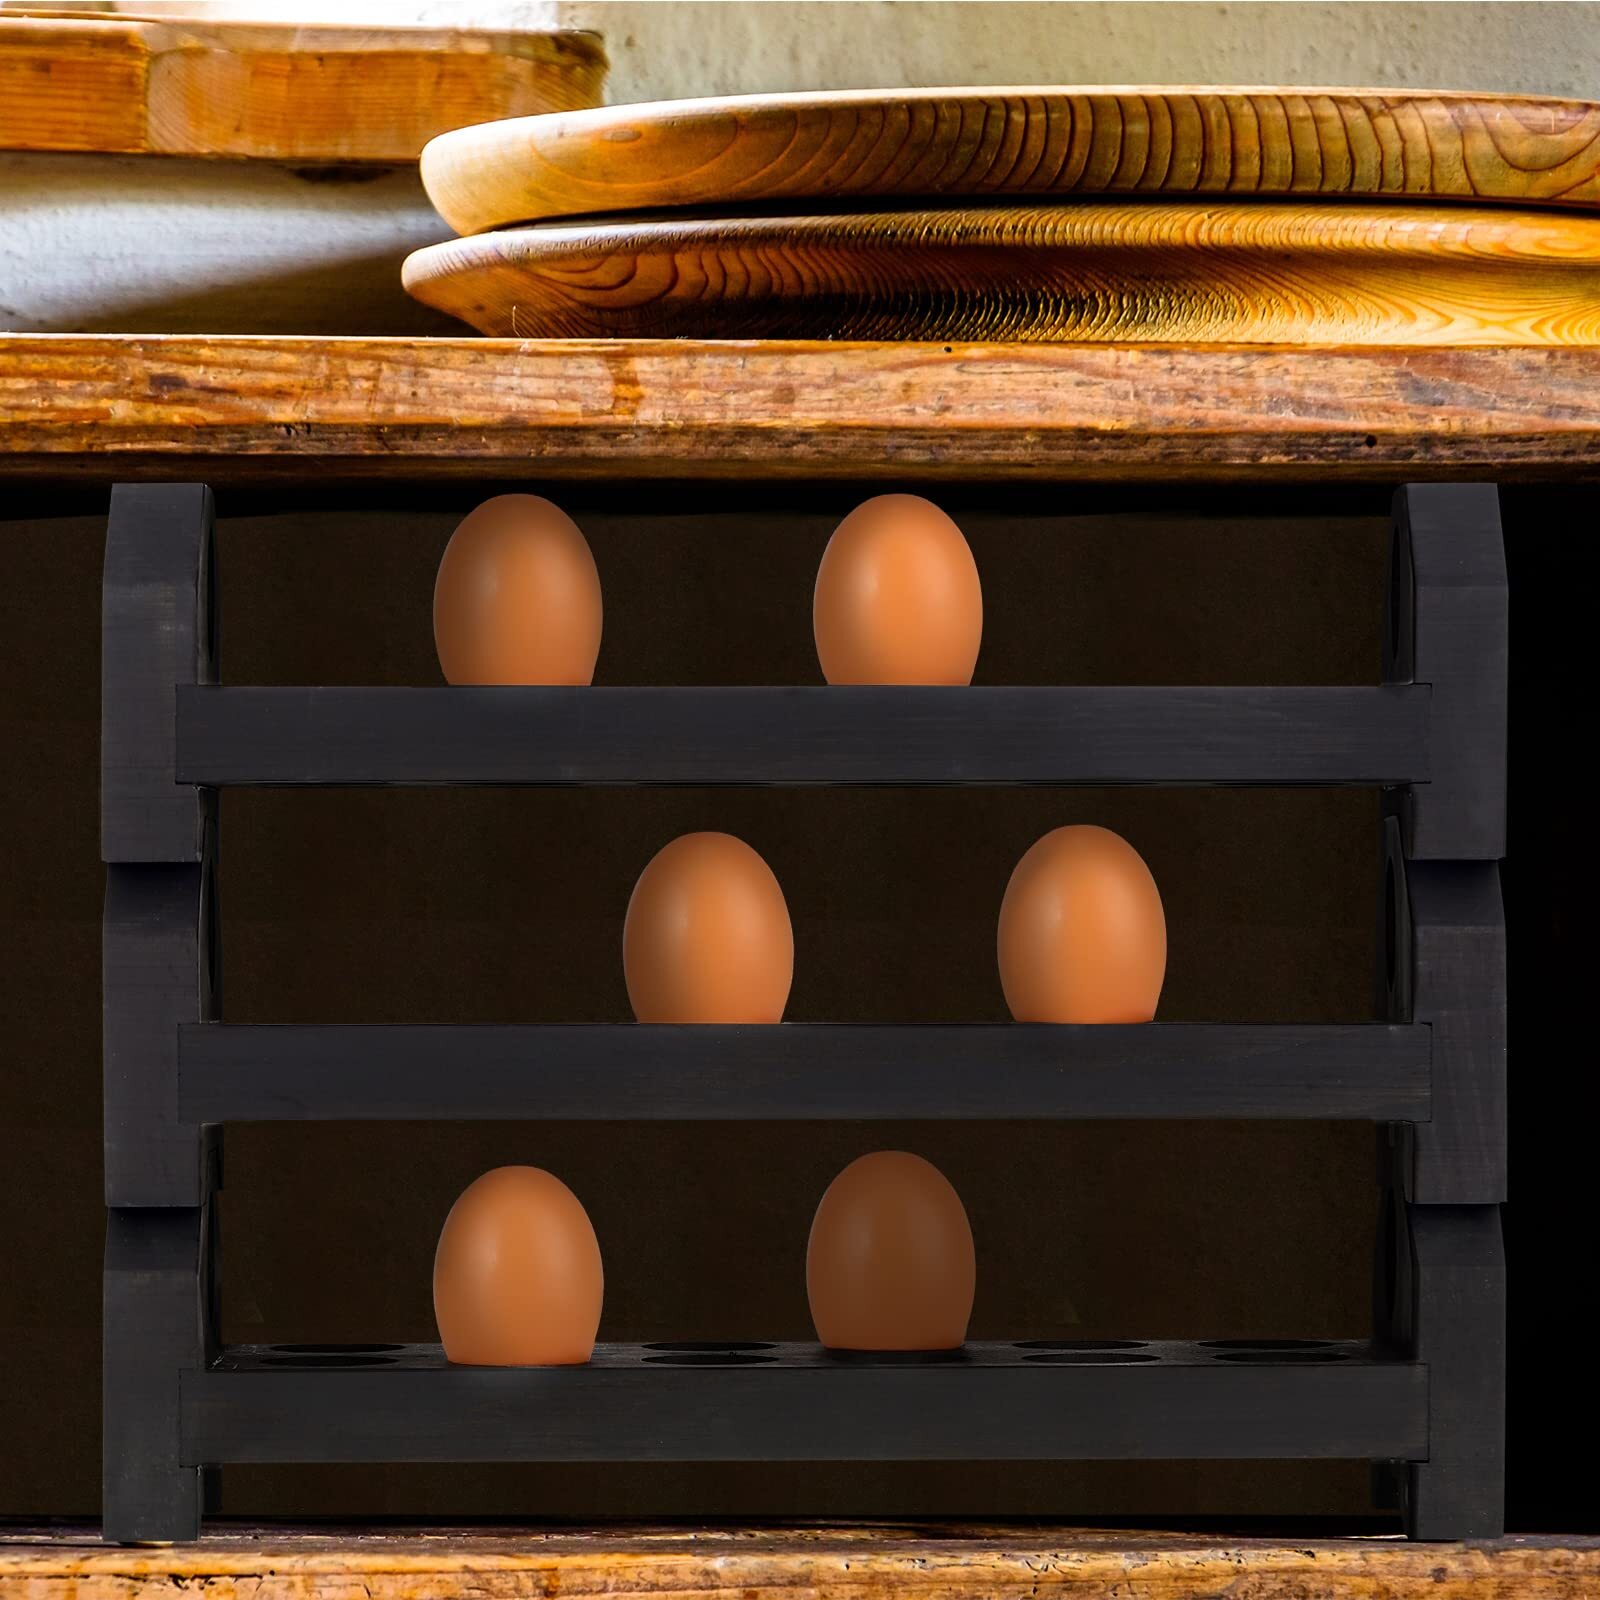 Set of 3 36 Holes Wooden Egg Holder Countertop Stackable Egg Rack Rustic Wooden Egg Tray Fresh Egg Container Rack Deviled Egg Tray Organizer for Kitchen Counter Storage, 13.9 x 3.9 x 3.9 Inch